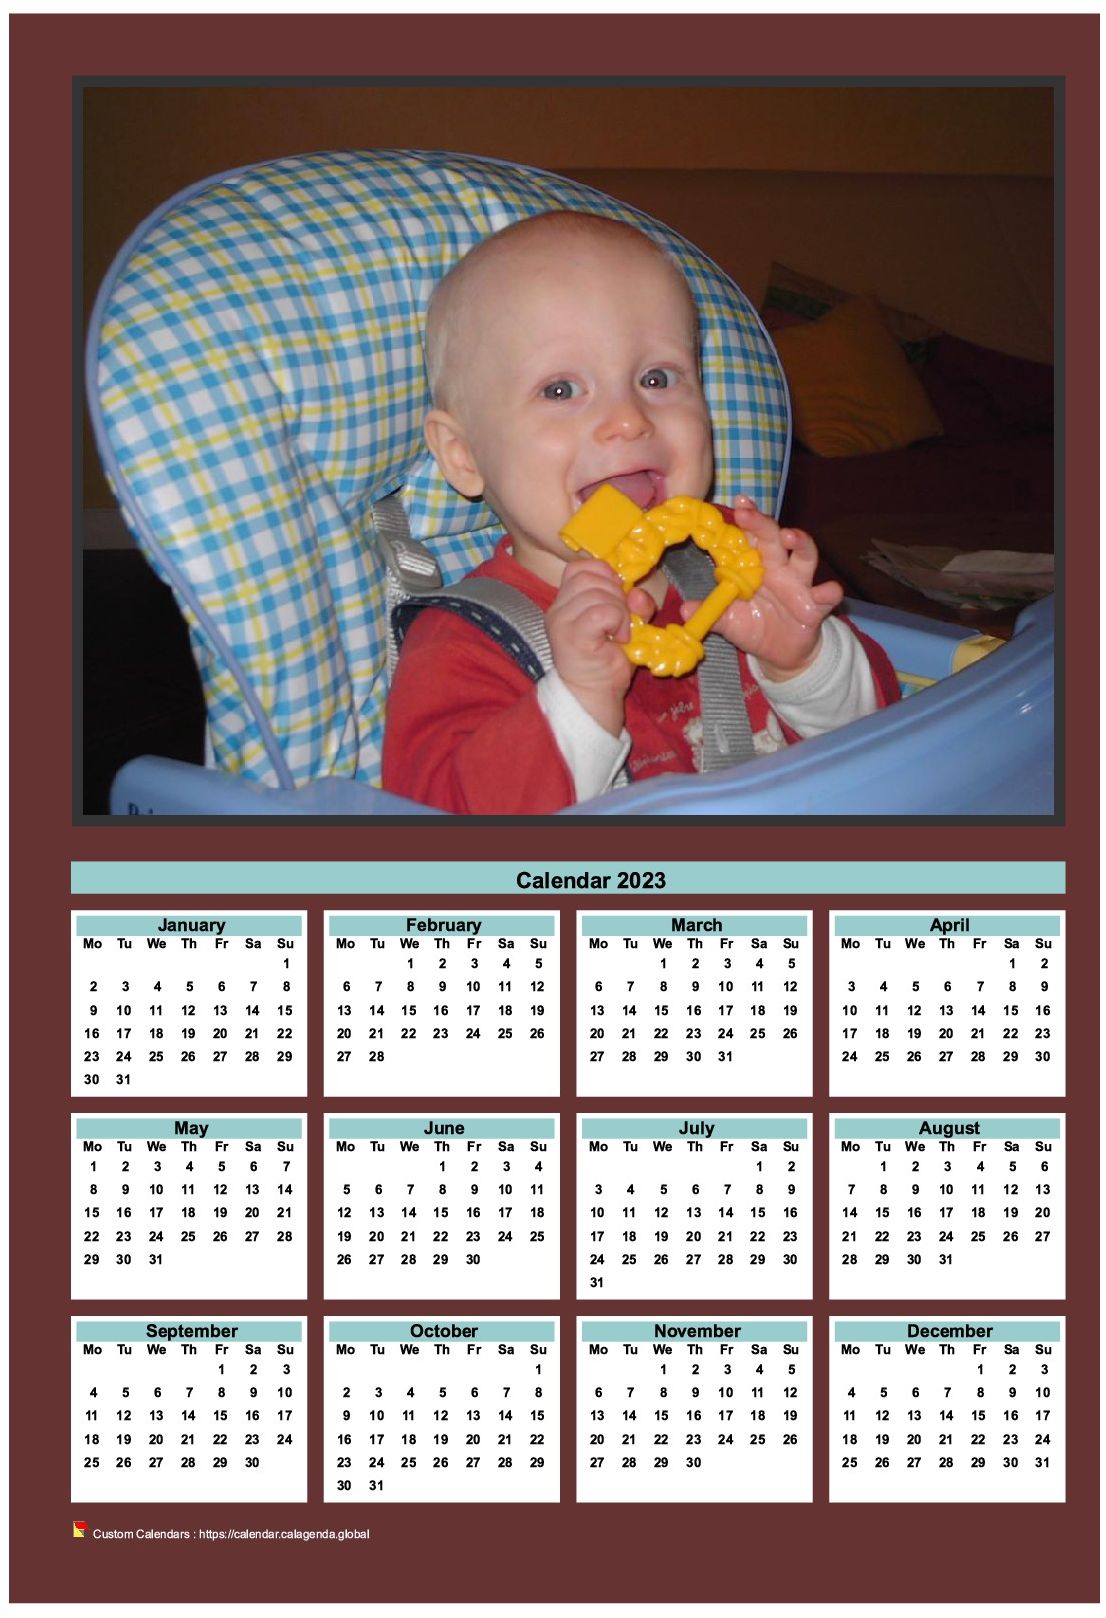 Calendar 2023 annual to print with family photo